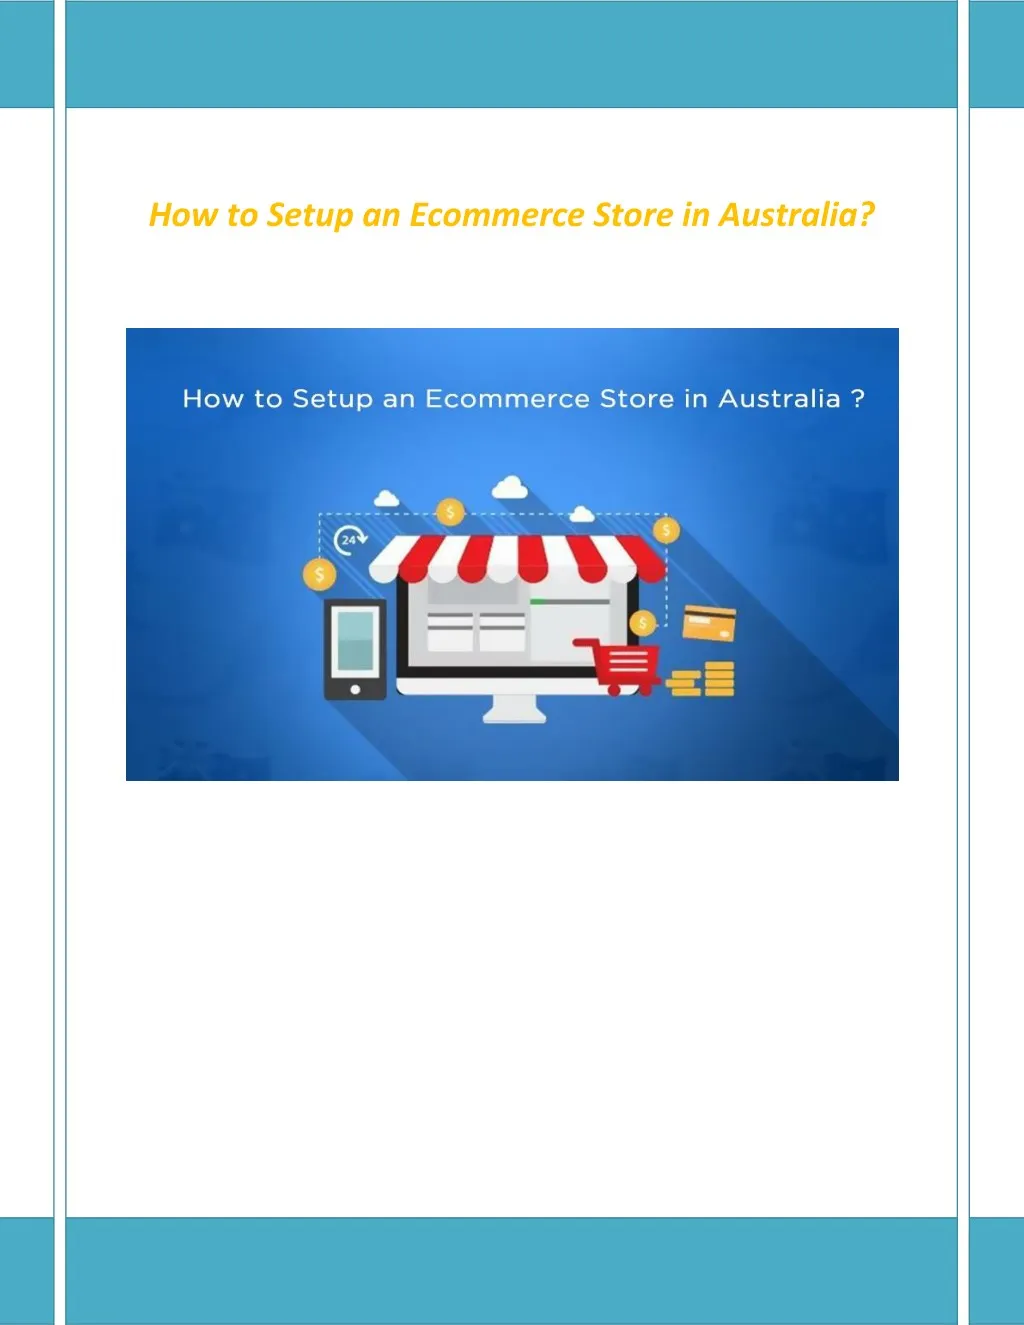 how to setup an ecommerce store in australia